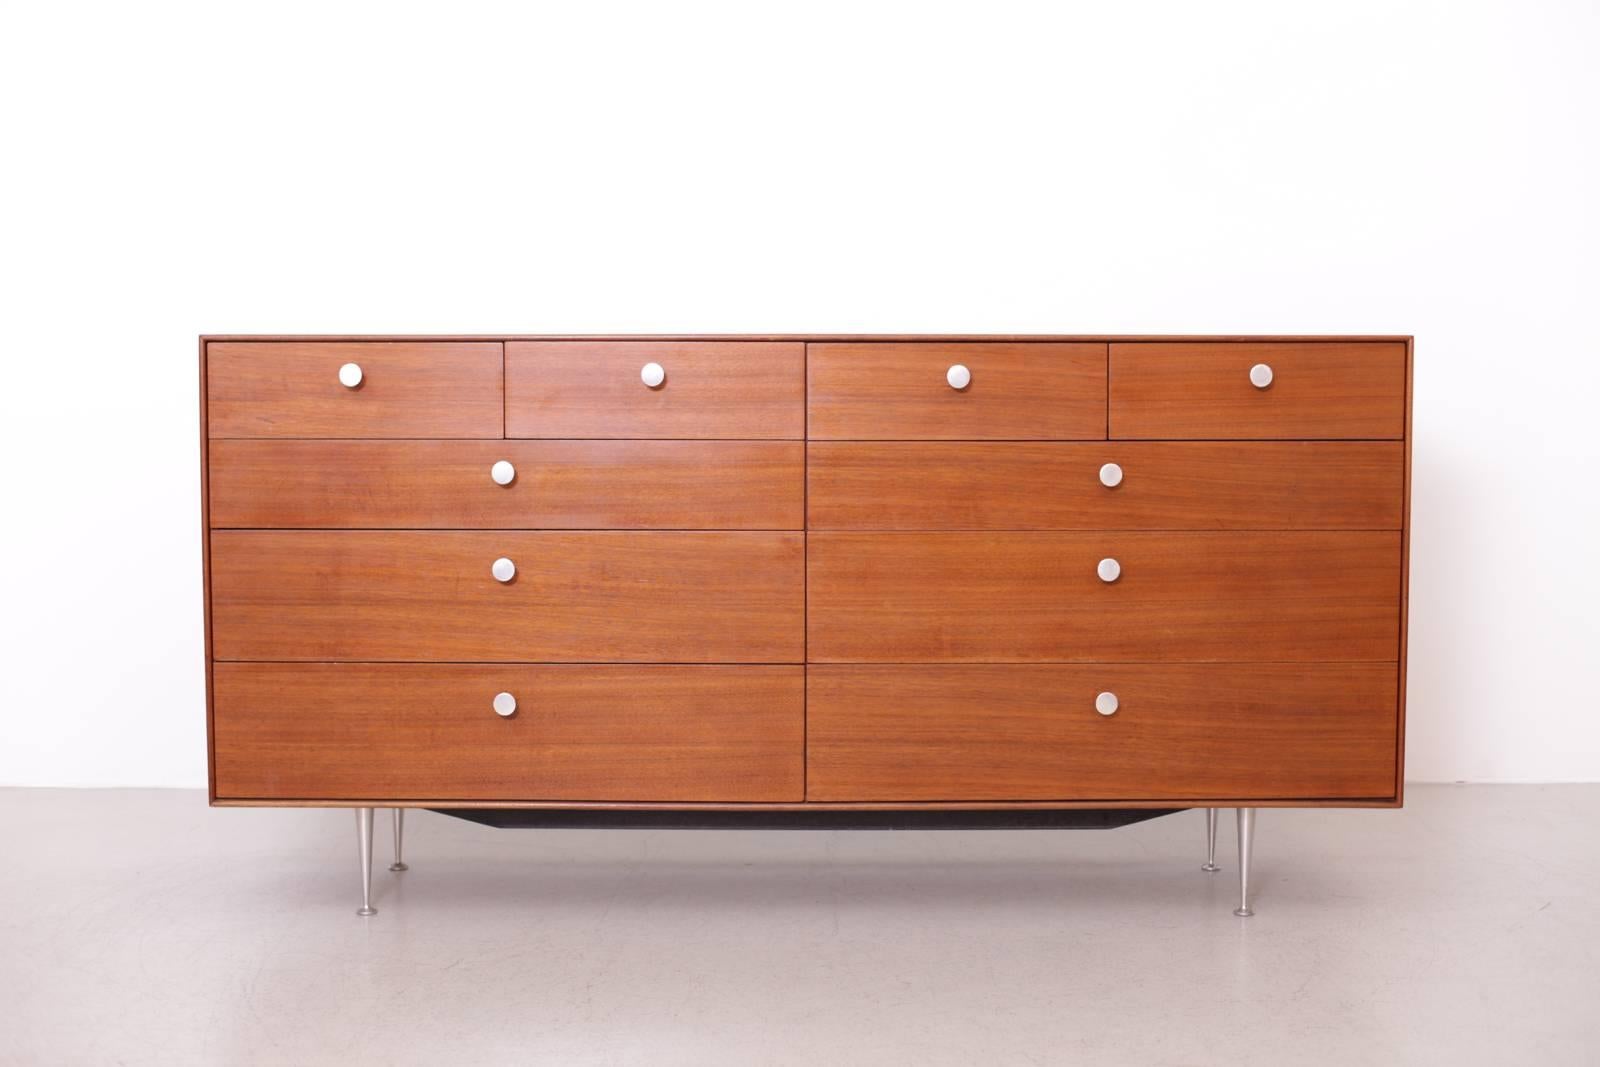 Rare thin edge chest of drawers in very good condition. Aluminum pulls and legs. The drawers are very smooth and easy going. A beautiful Mid-Century Classic.